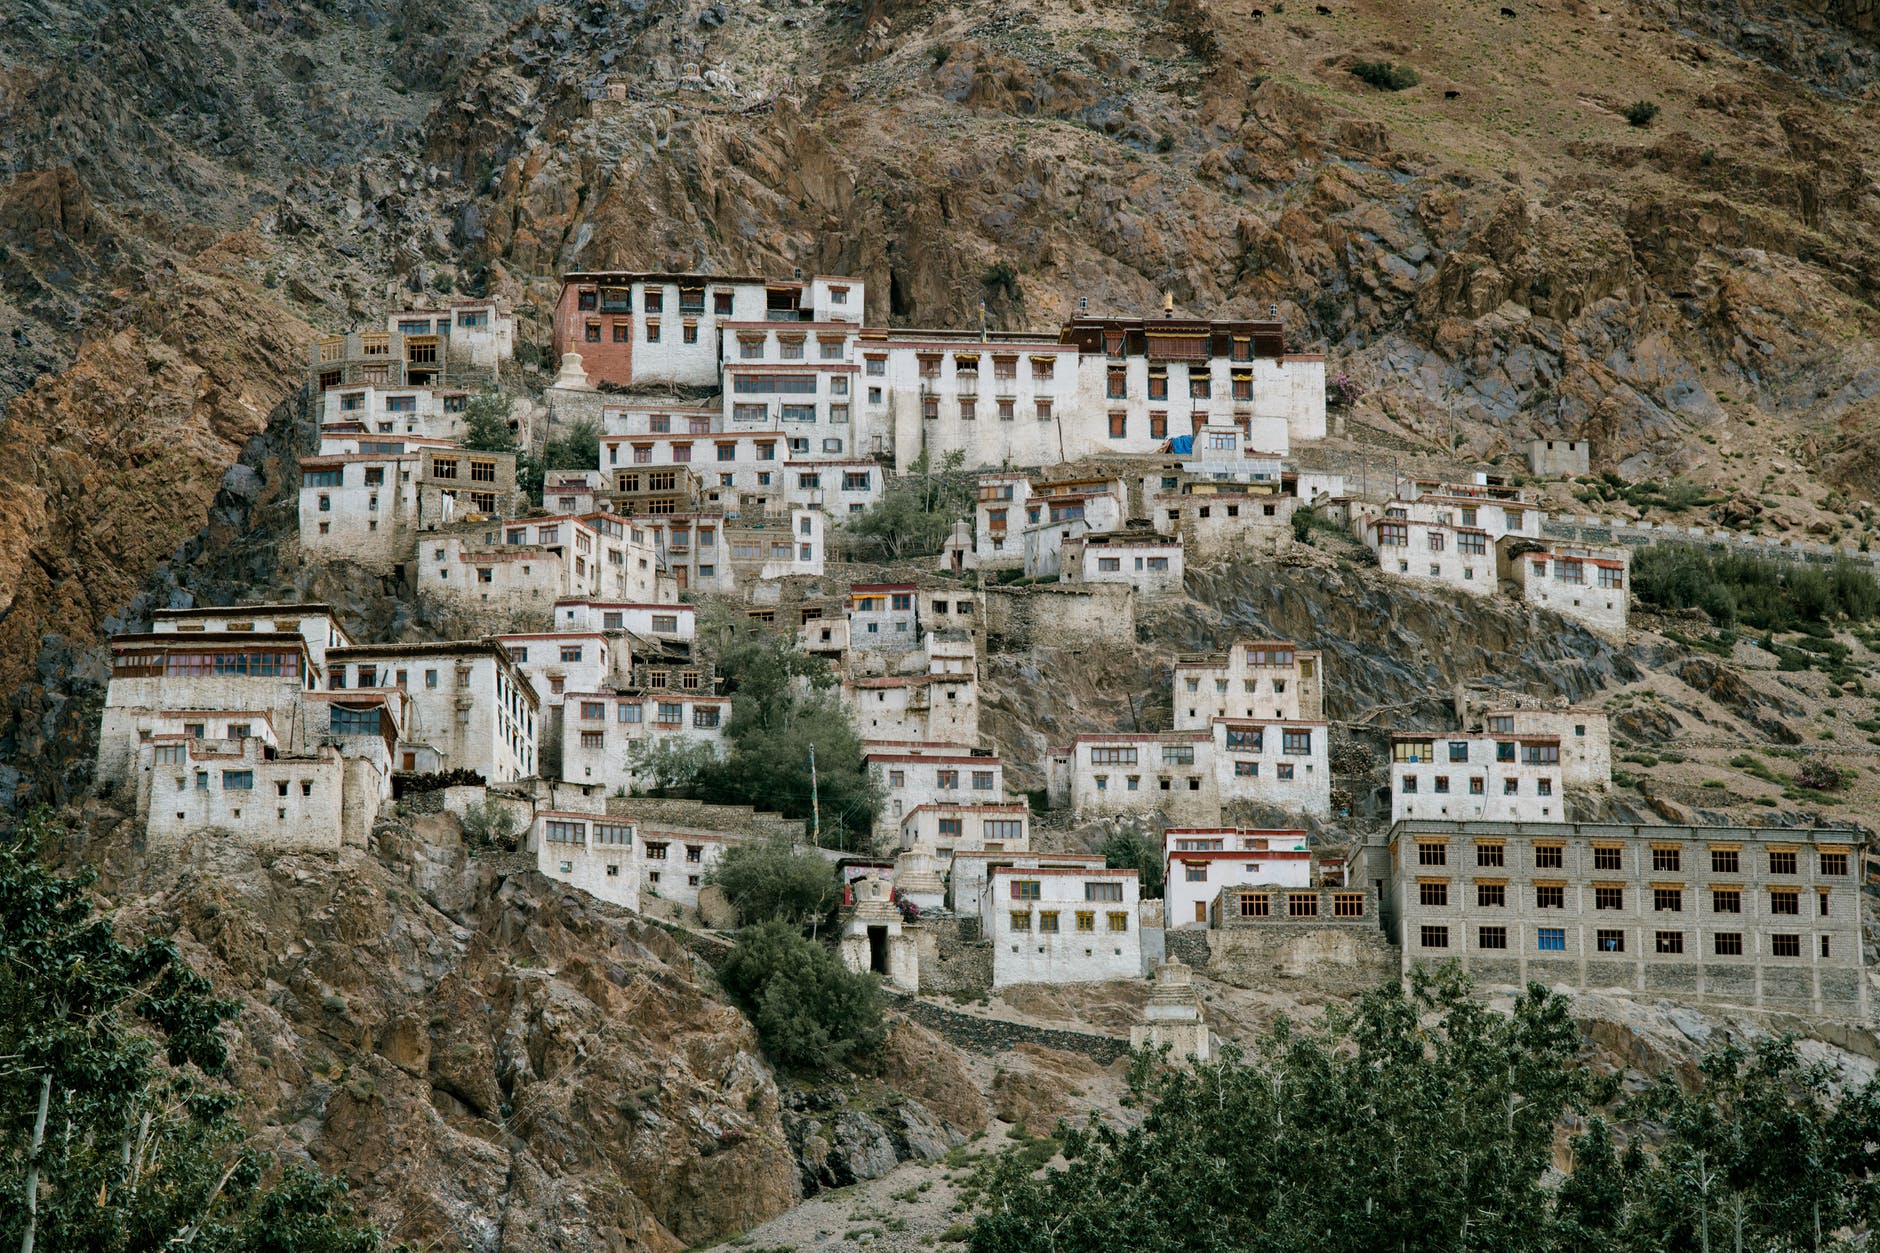 ancient tibetan monastery located on mountain slope in wild valley